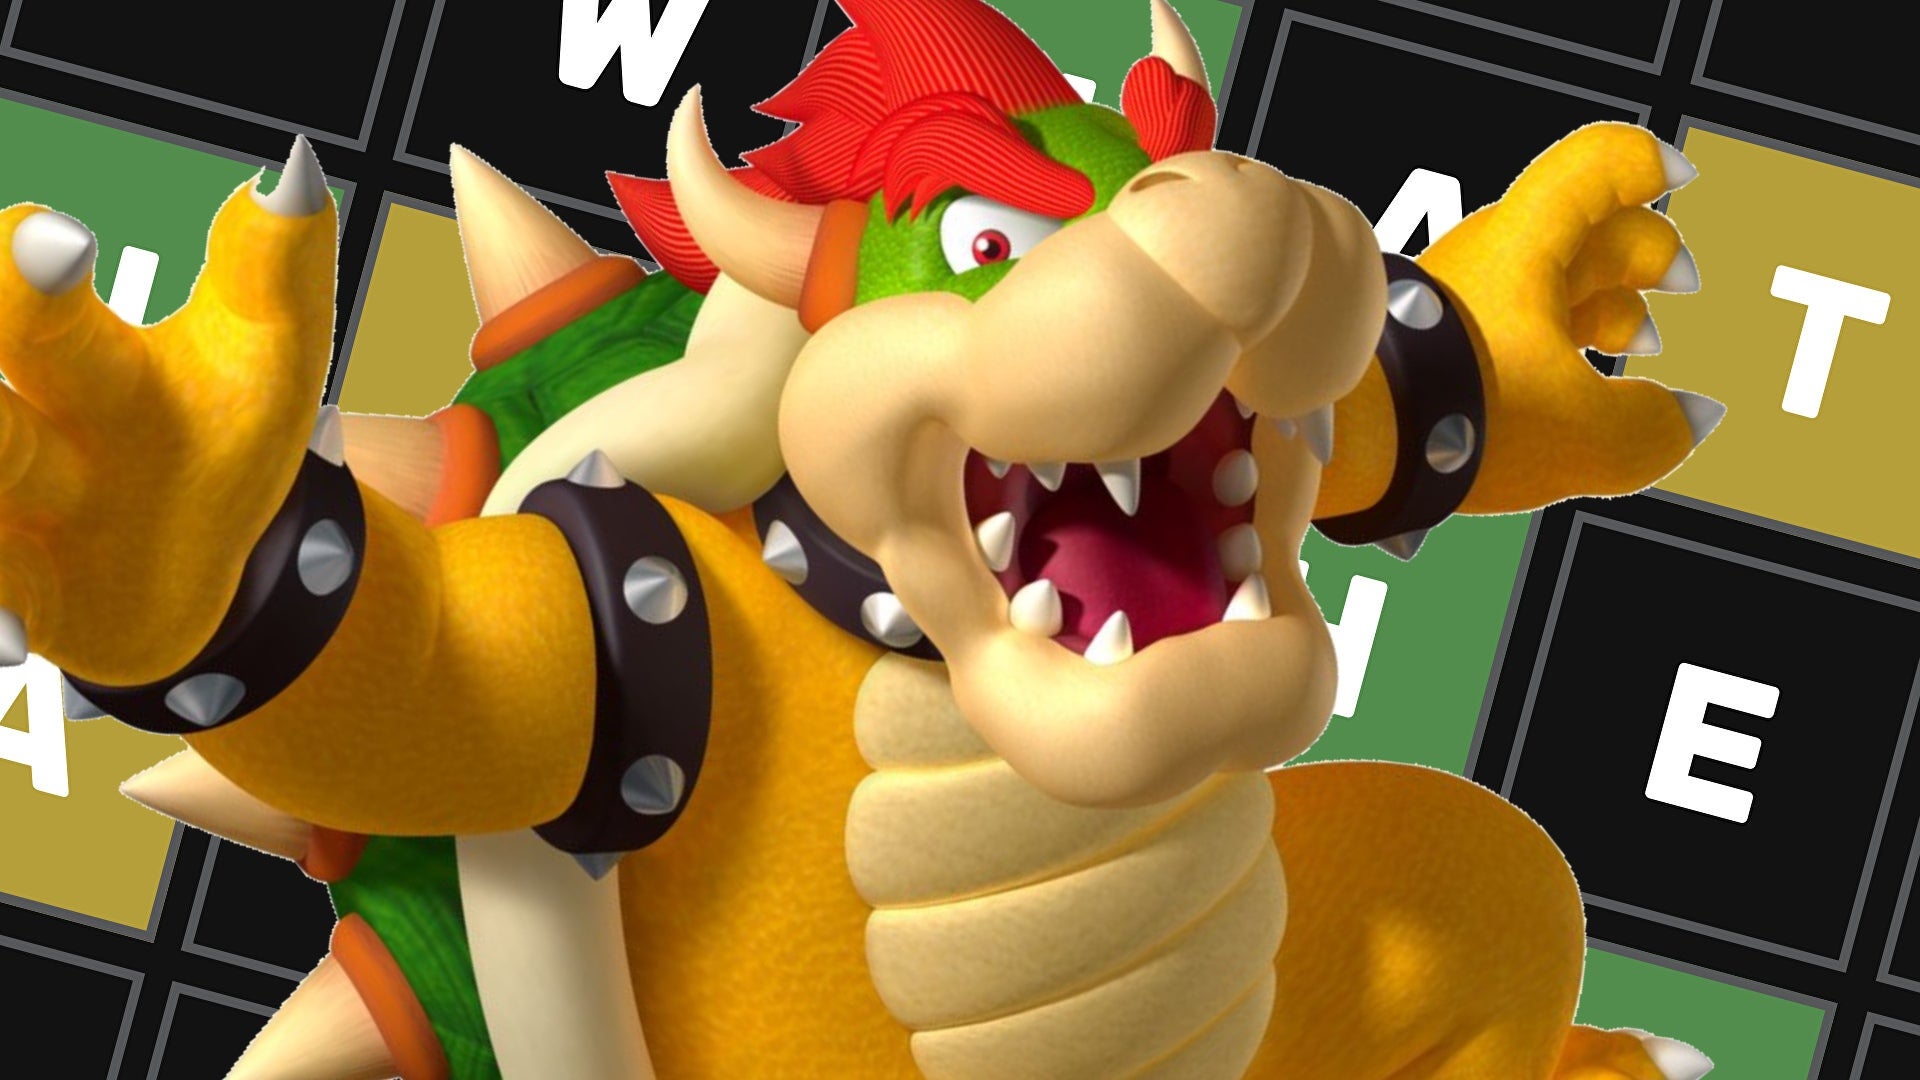 A screenshot of Wordle with Nintendo's Bowser character superimposed